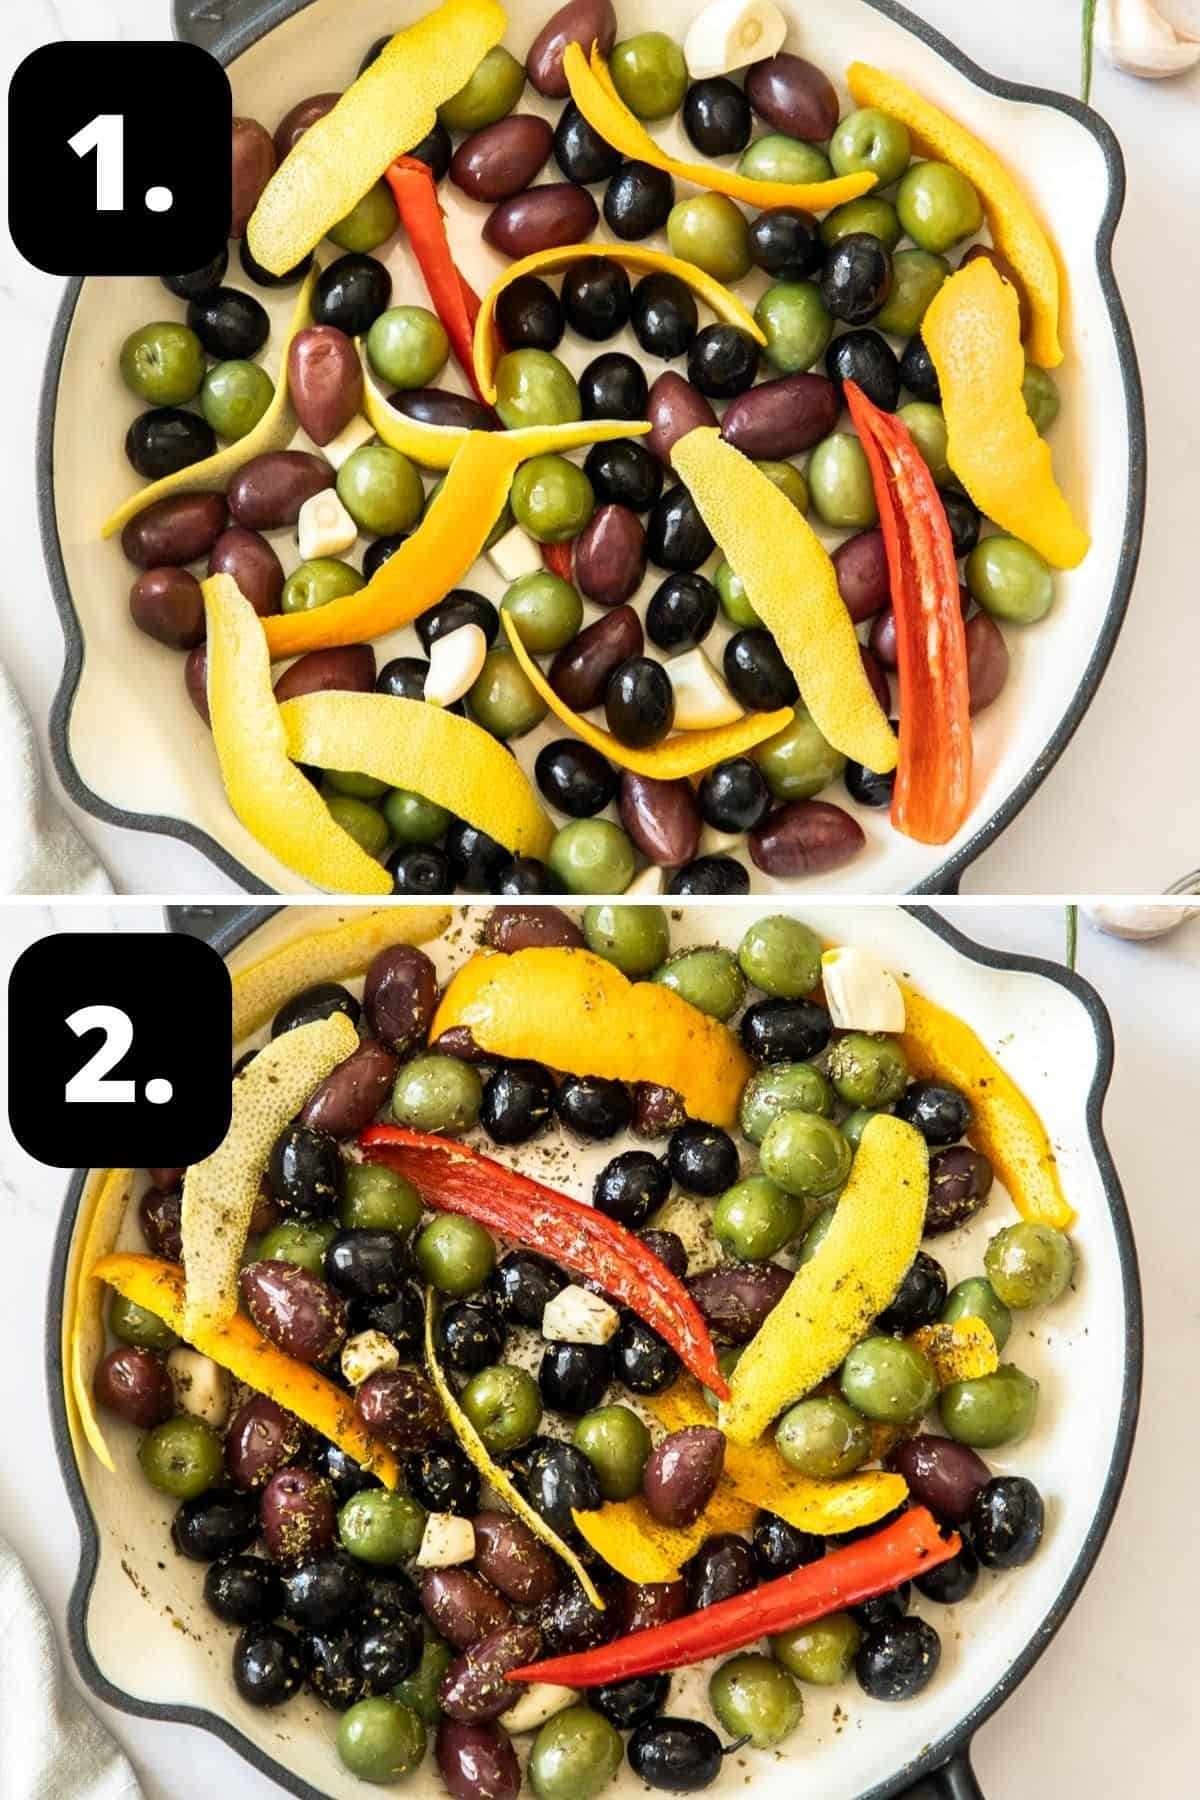 Steps 1-2 of preparing this recipe - the olives and peel in a baking dish, and the olives Steps 1-2 of preparing this recipe - the olives and peel in a baking dish, and the olives with oregano ready for the oven.with oregano ready for the oven.